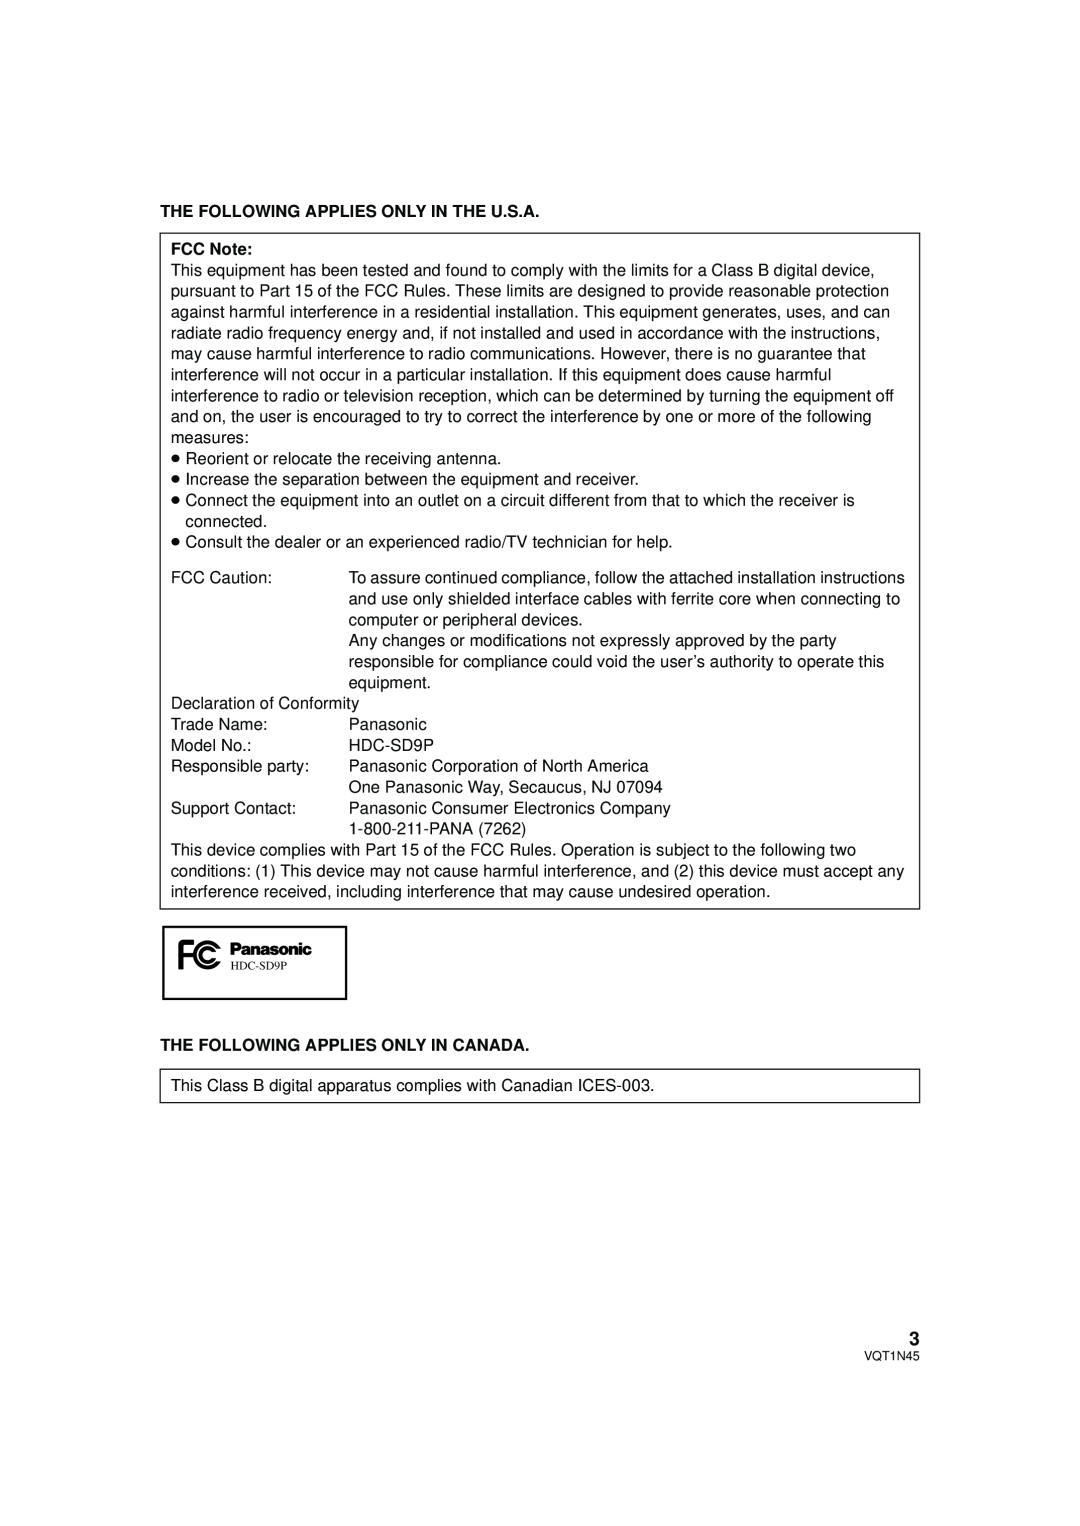 Panasonic HDC-SD9PC manual THE FOLLOWING APPLIES ONLY IN THE U.S.A FCC Note, The Following Applies Only In Canada 